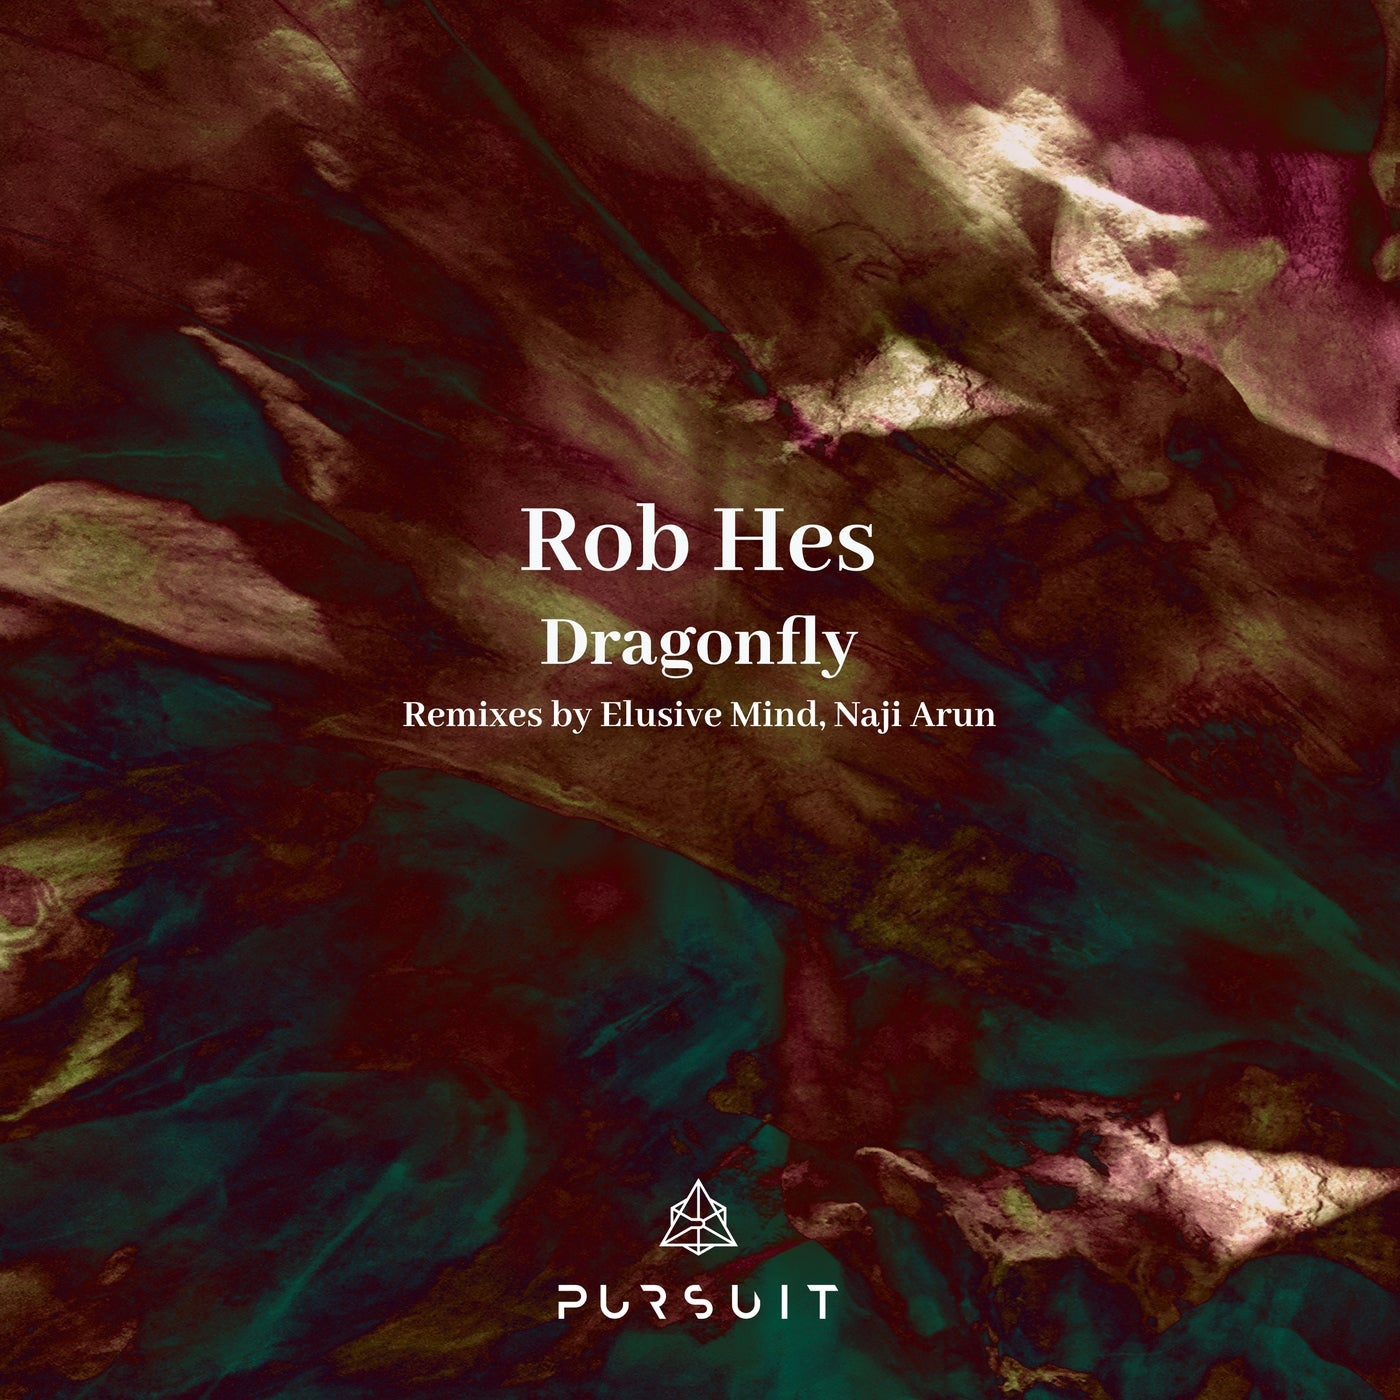 Download Rob Hes - Dragonfly on Electrobuzz